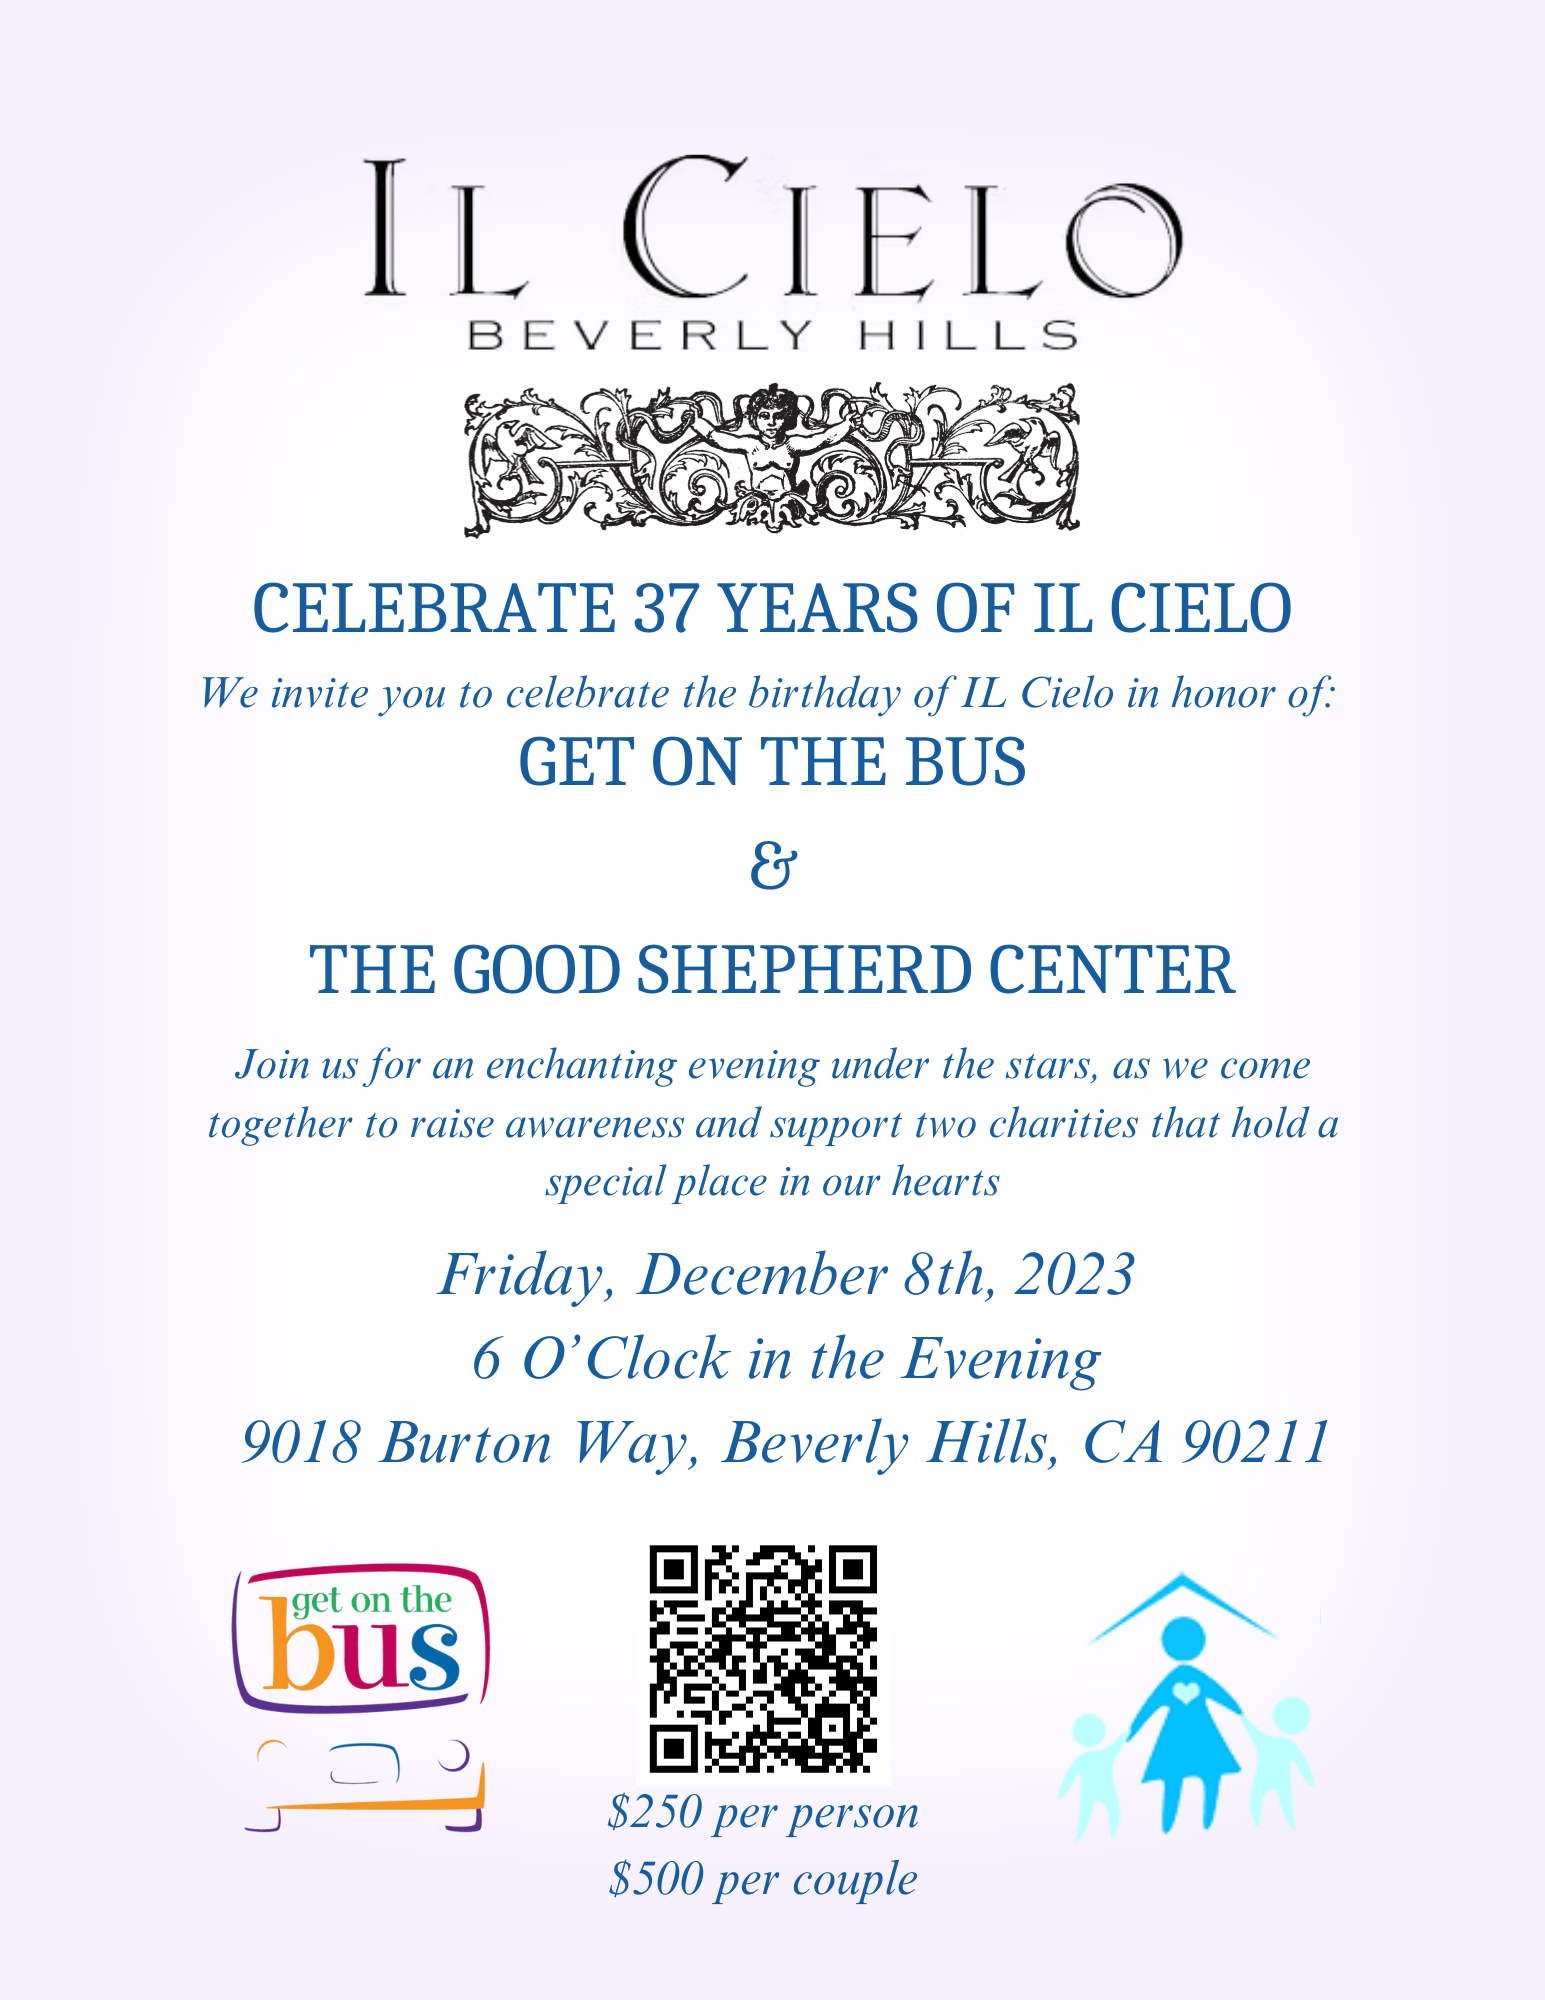 THE GOOD Shepherd CENTER & Get On the Bus (3)